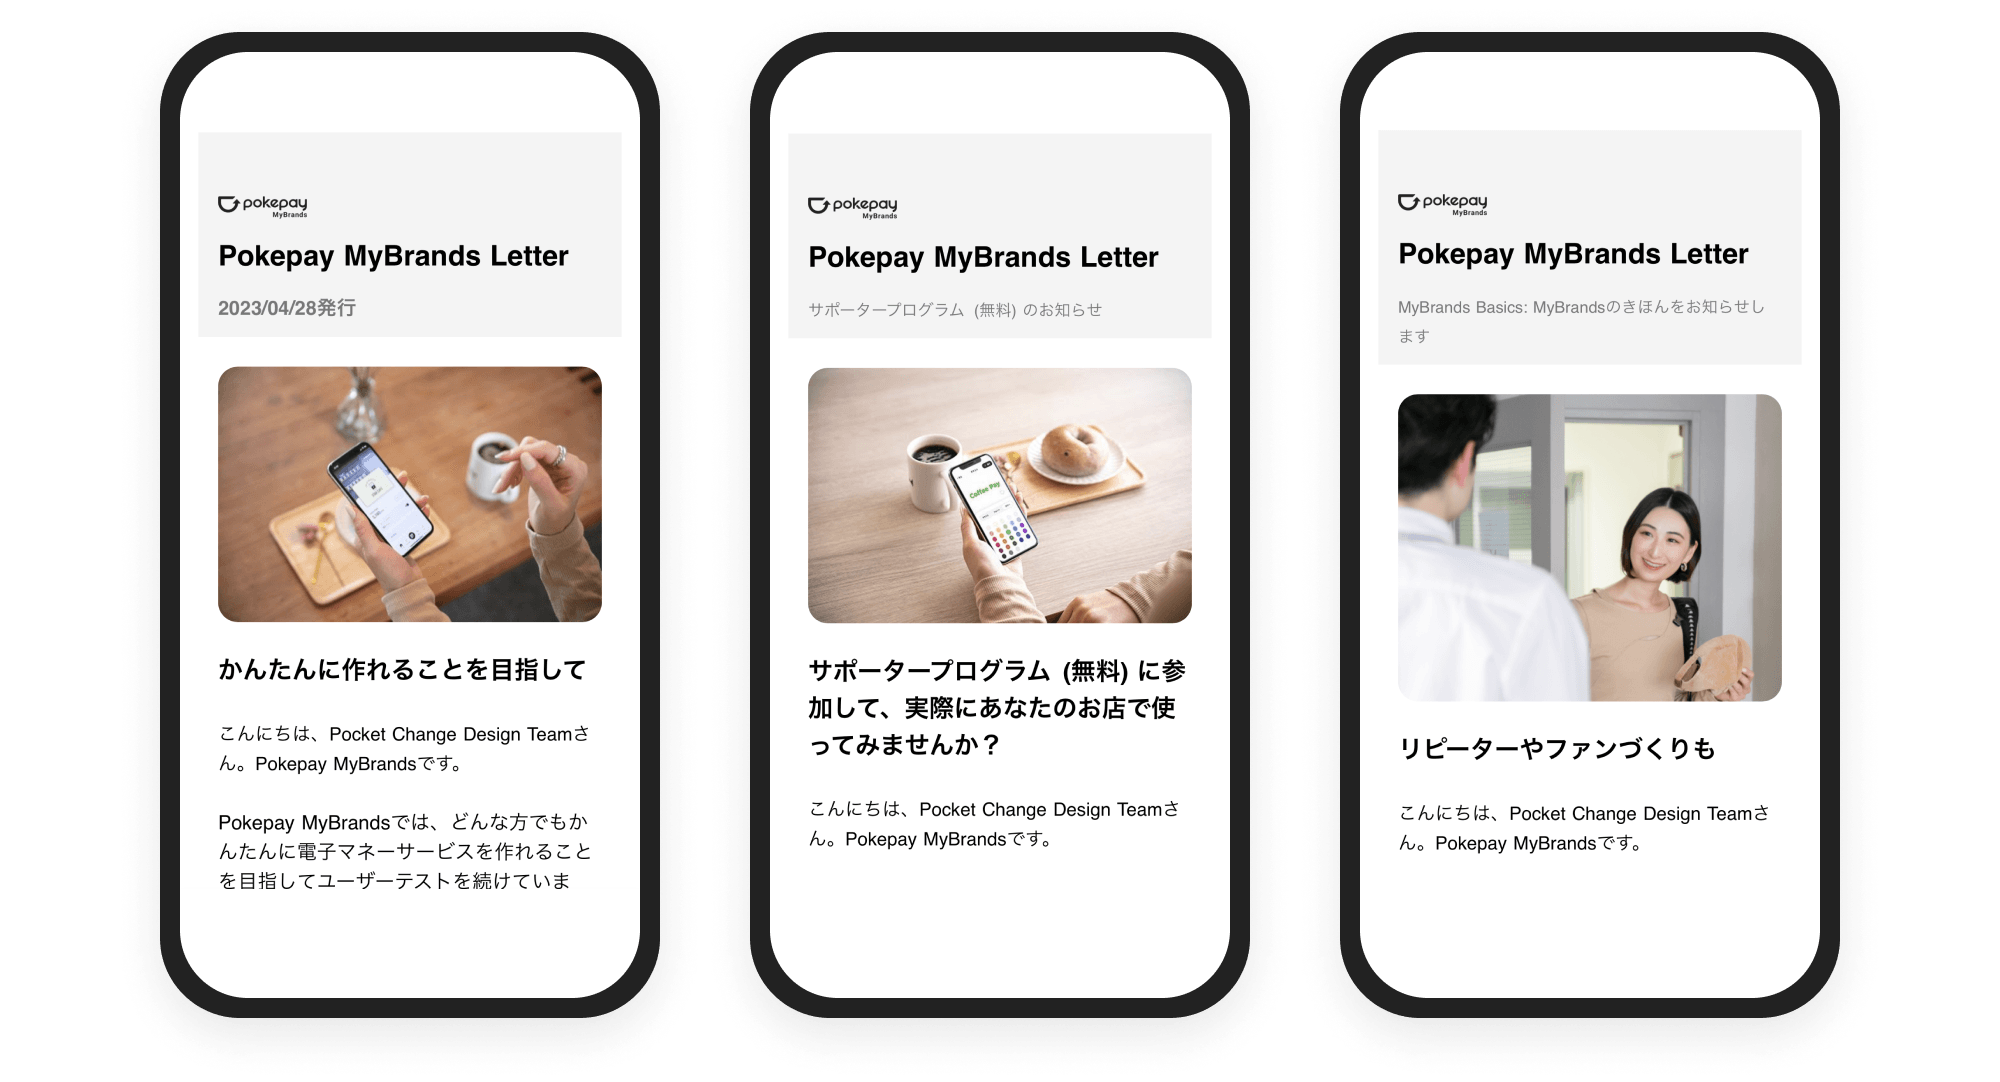 The image of Pokepay Letter display on Phone